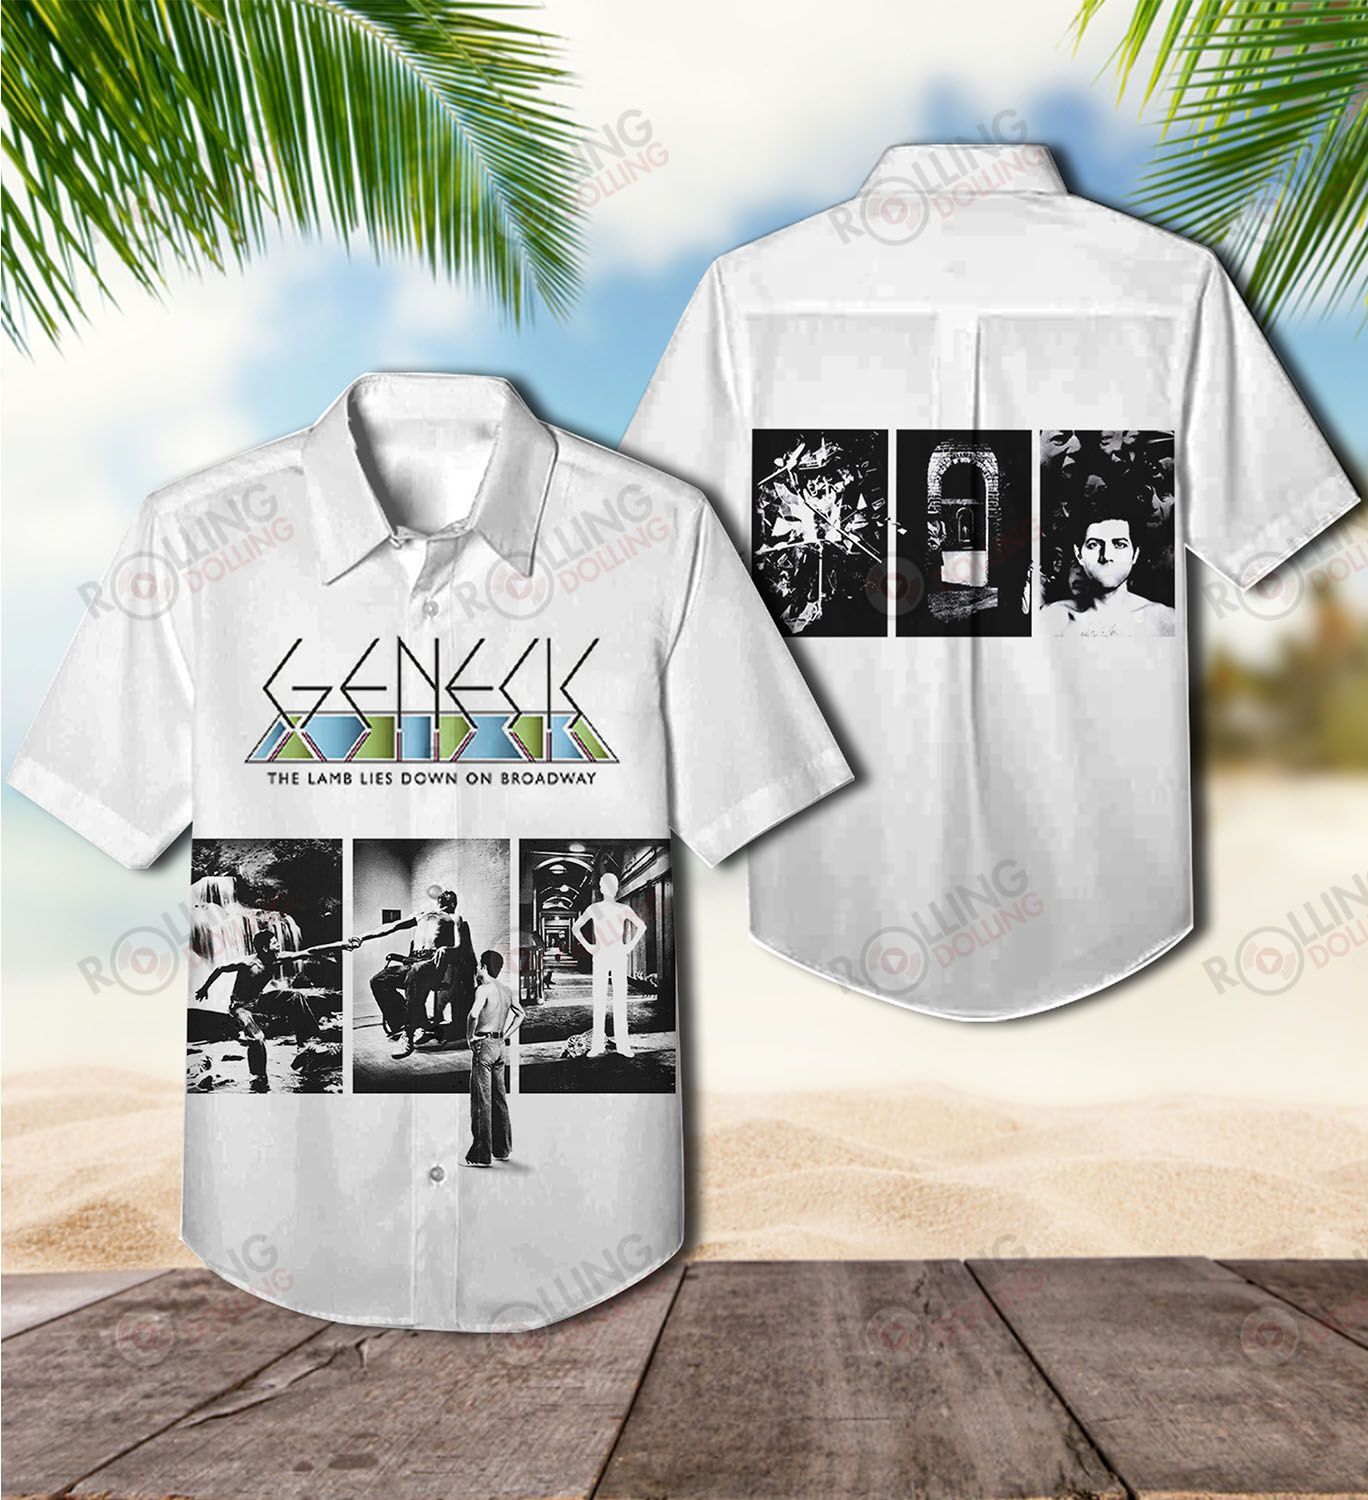 Check out these top 100+ Hawaiian shirt so cool for rock fans 427